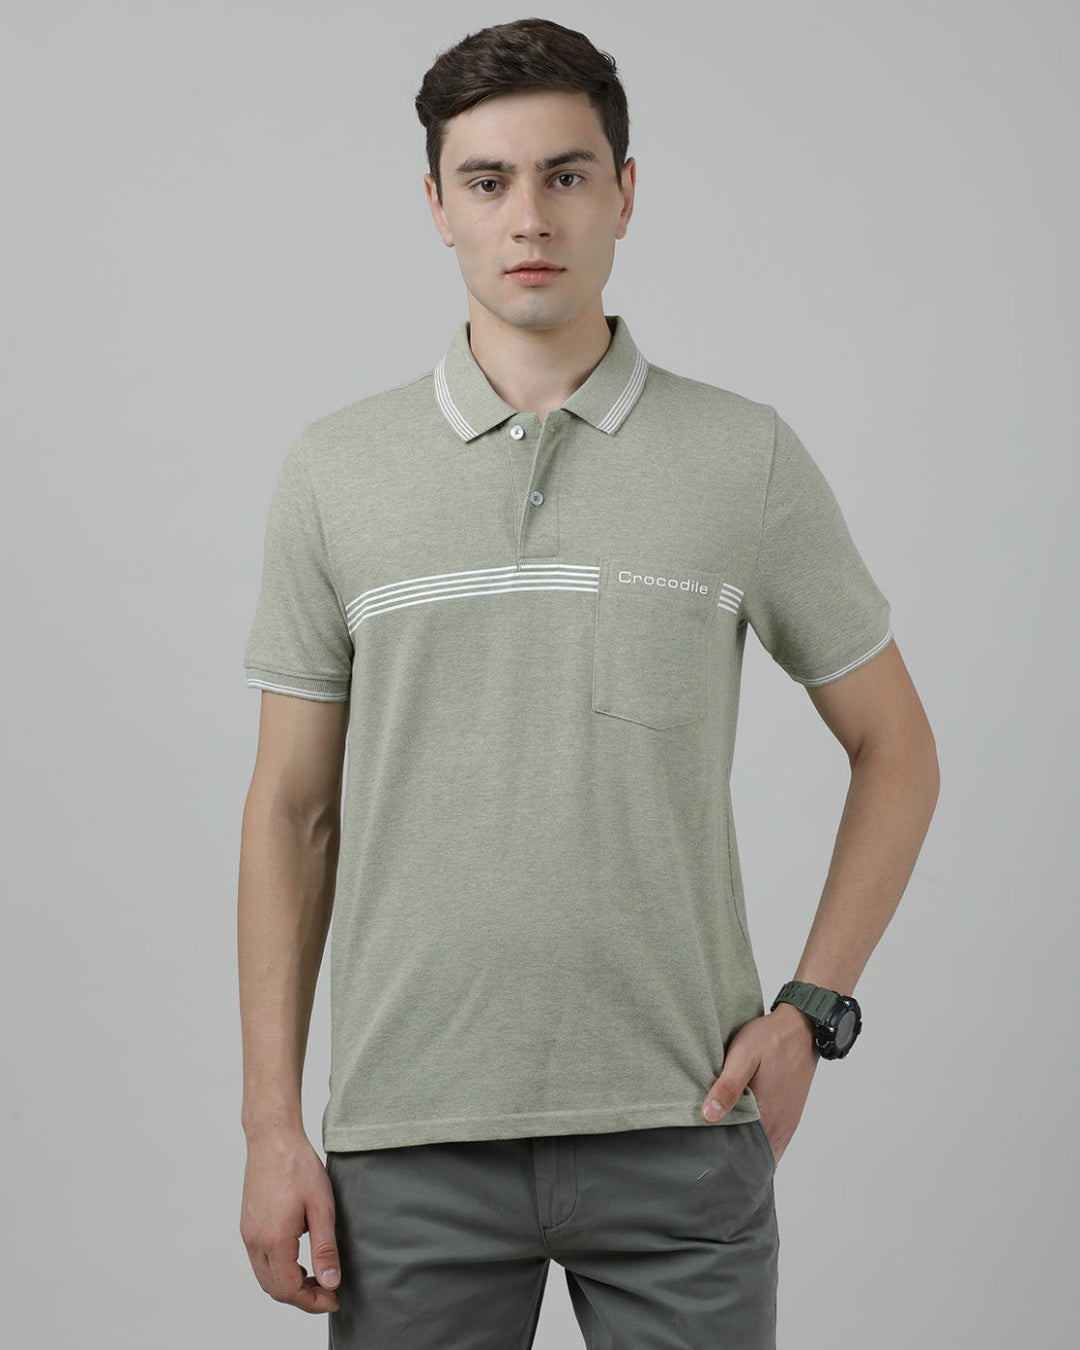 Casual Green Solid Polo Melange Printed T-Shirt Half Sleeve Slim Fit with Collar for Men